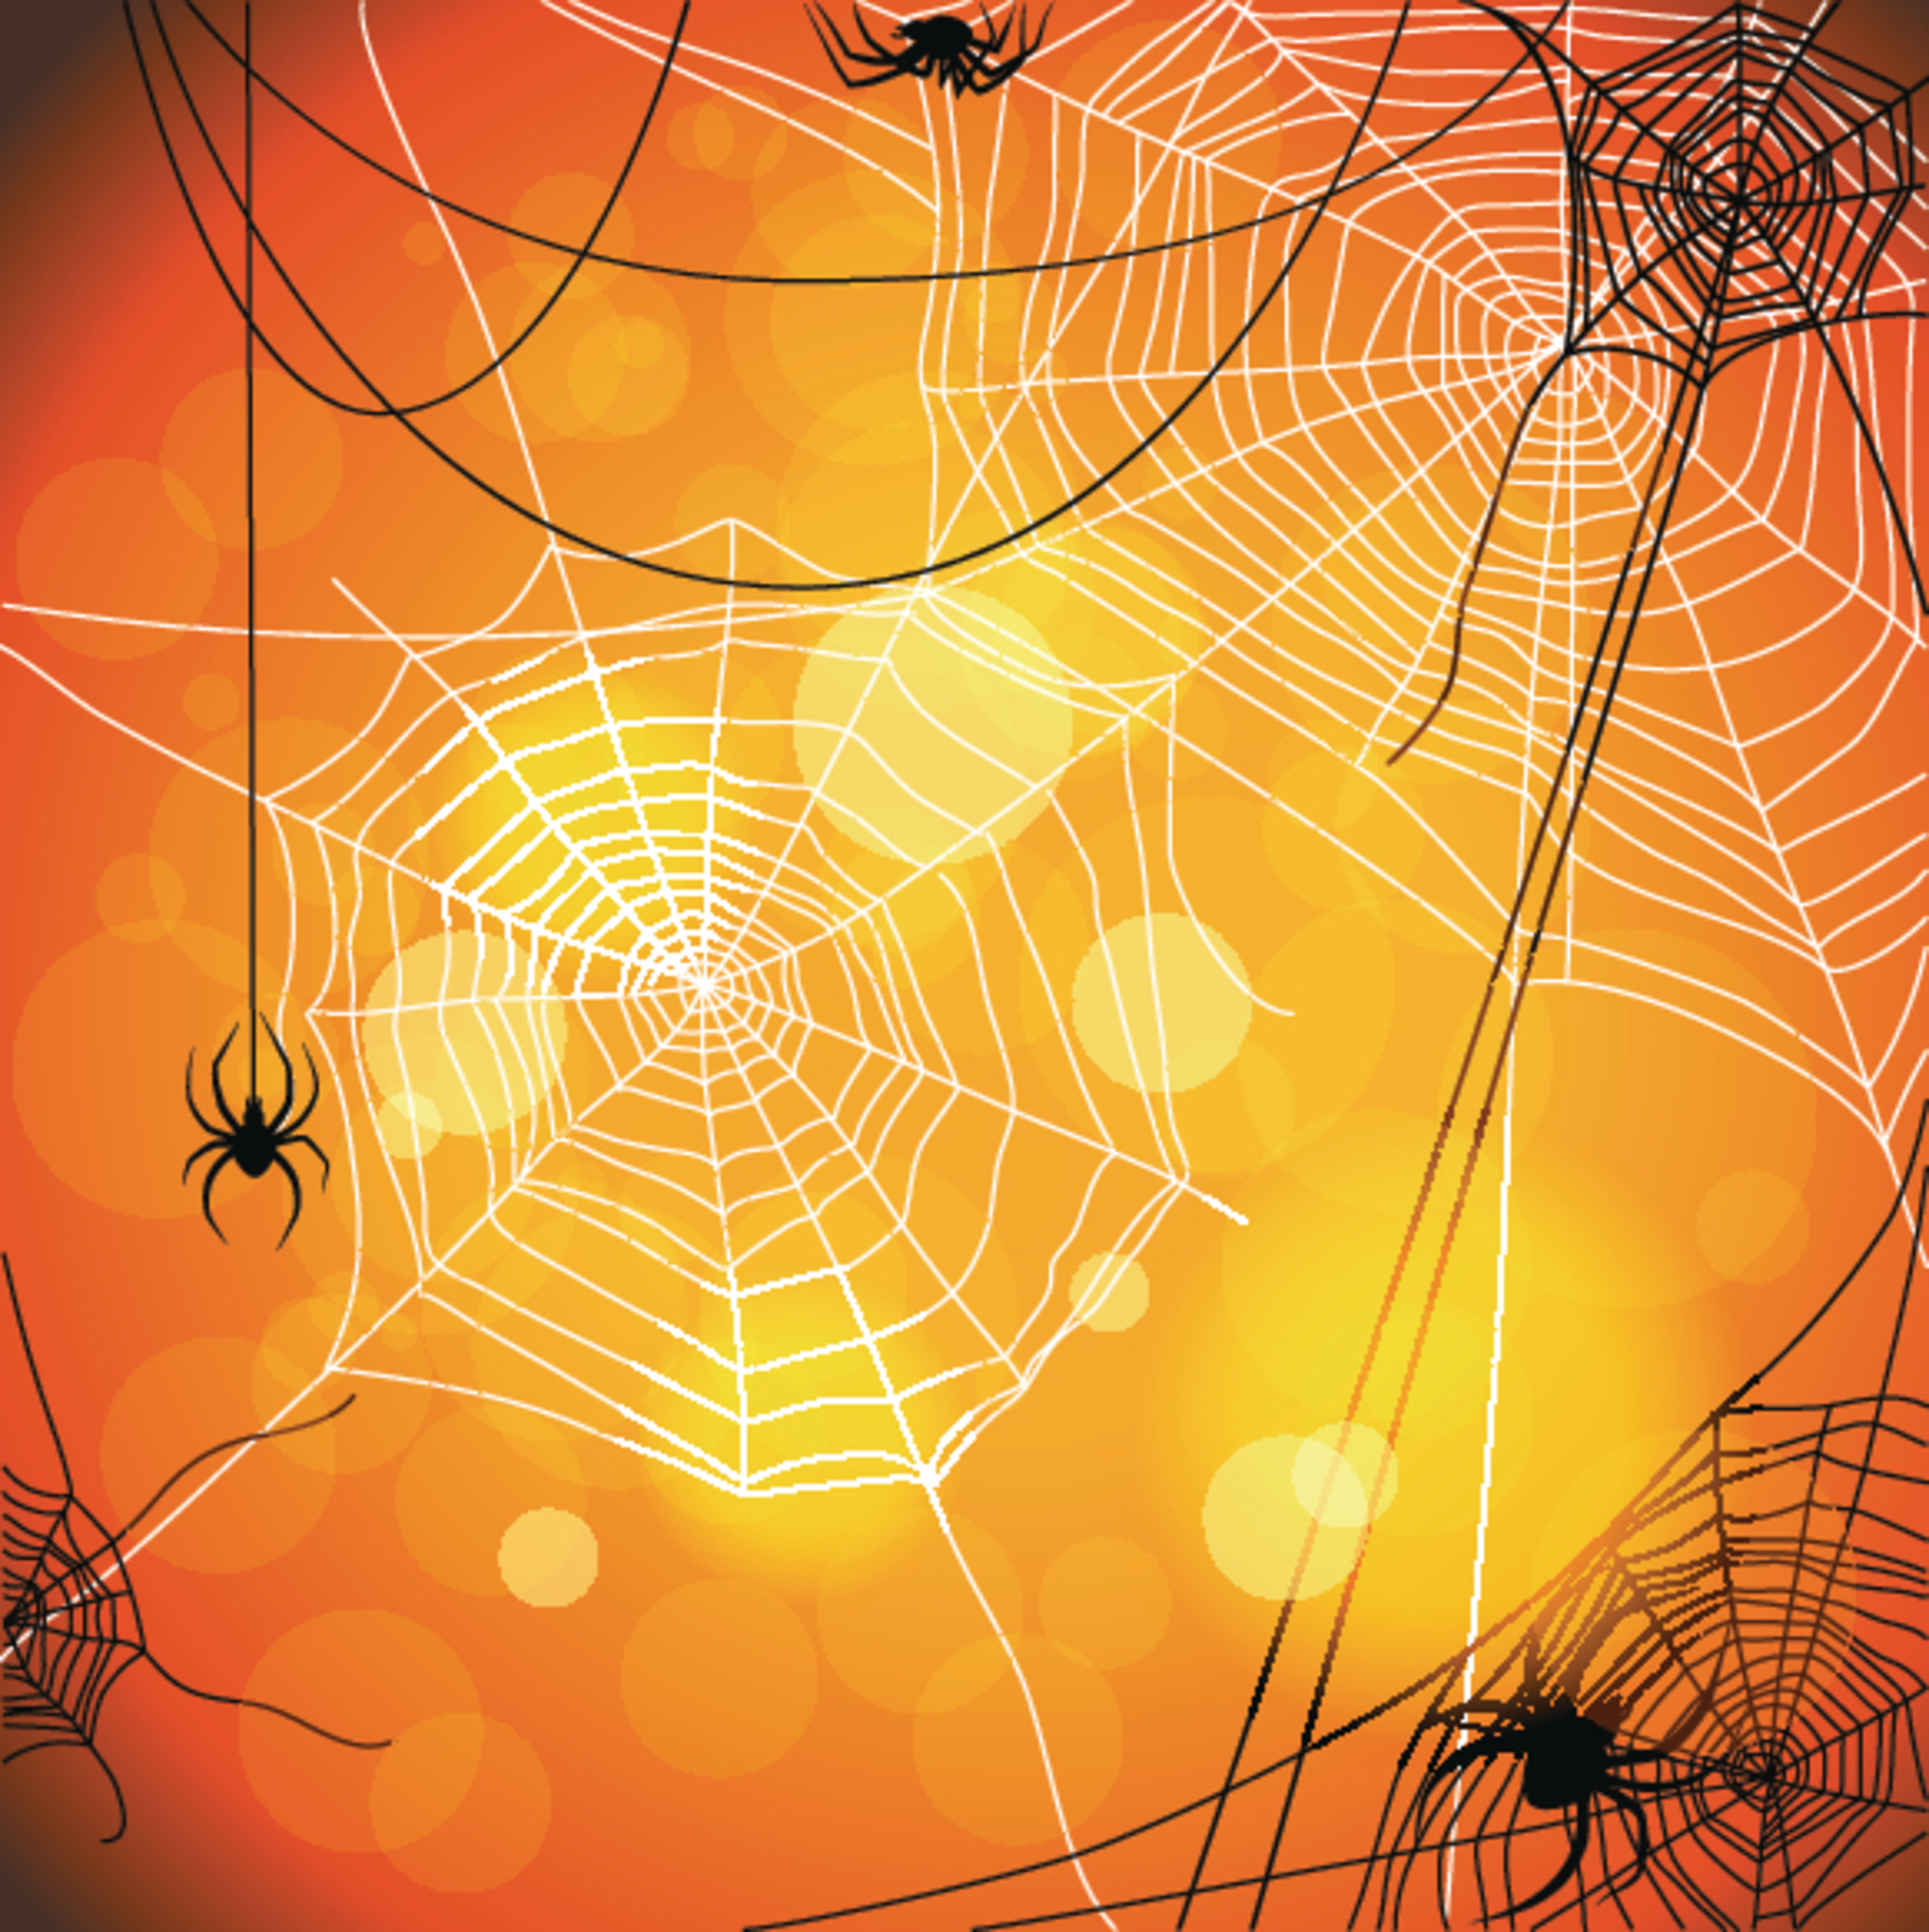 Spider Web iPhone Wallpaper - iPhone Wallpapers